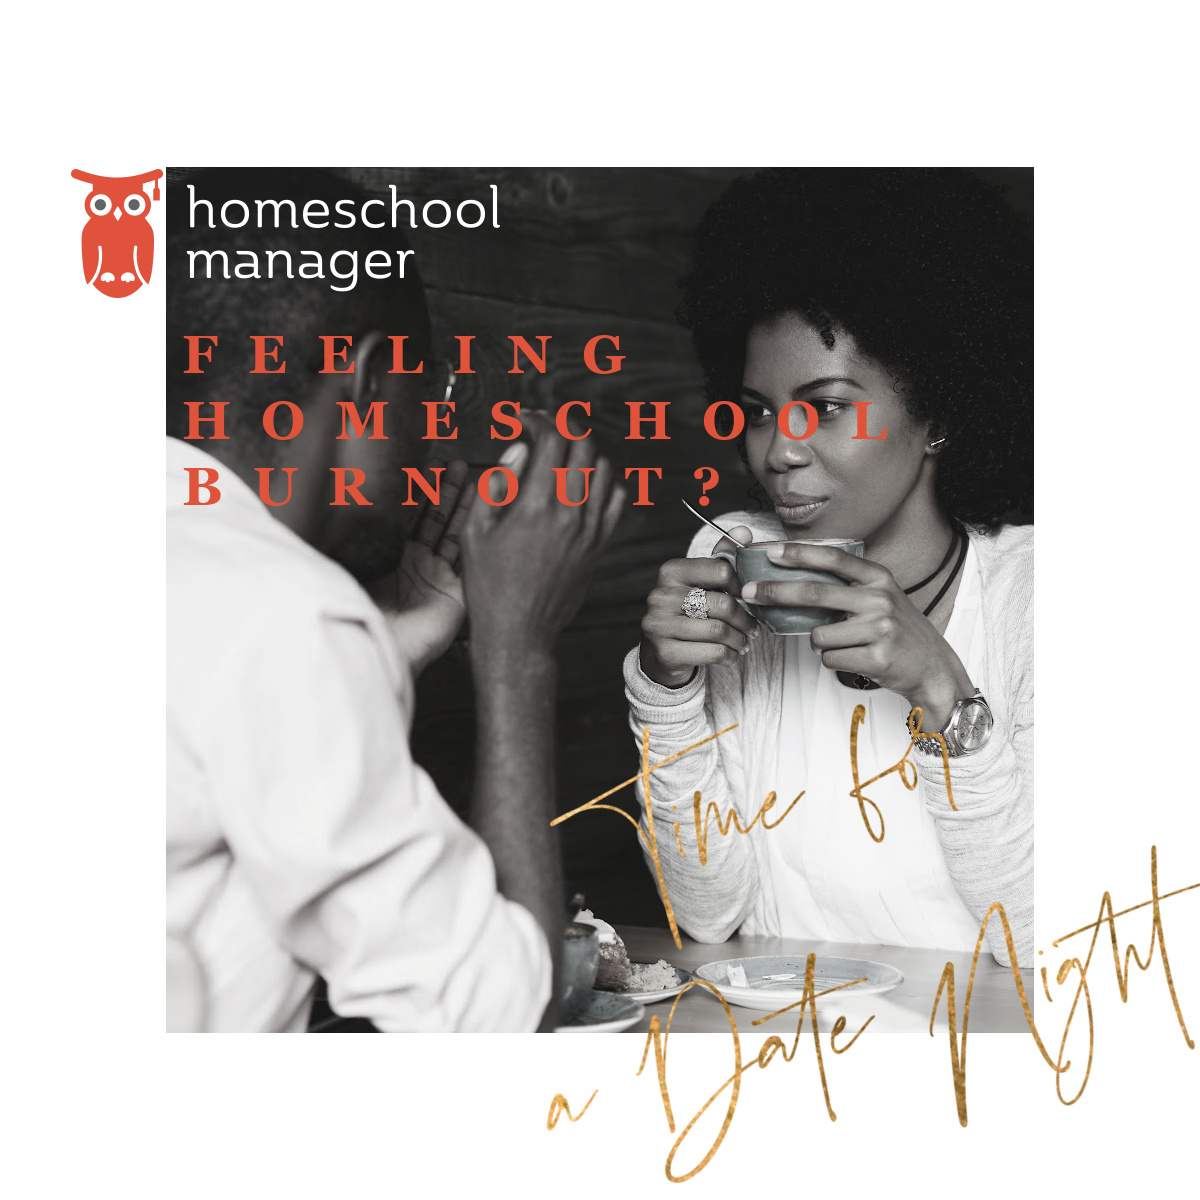 Avoid Homeschool Burnout: Time for a Date Night